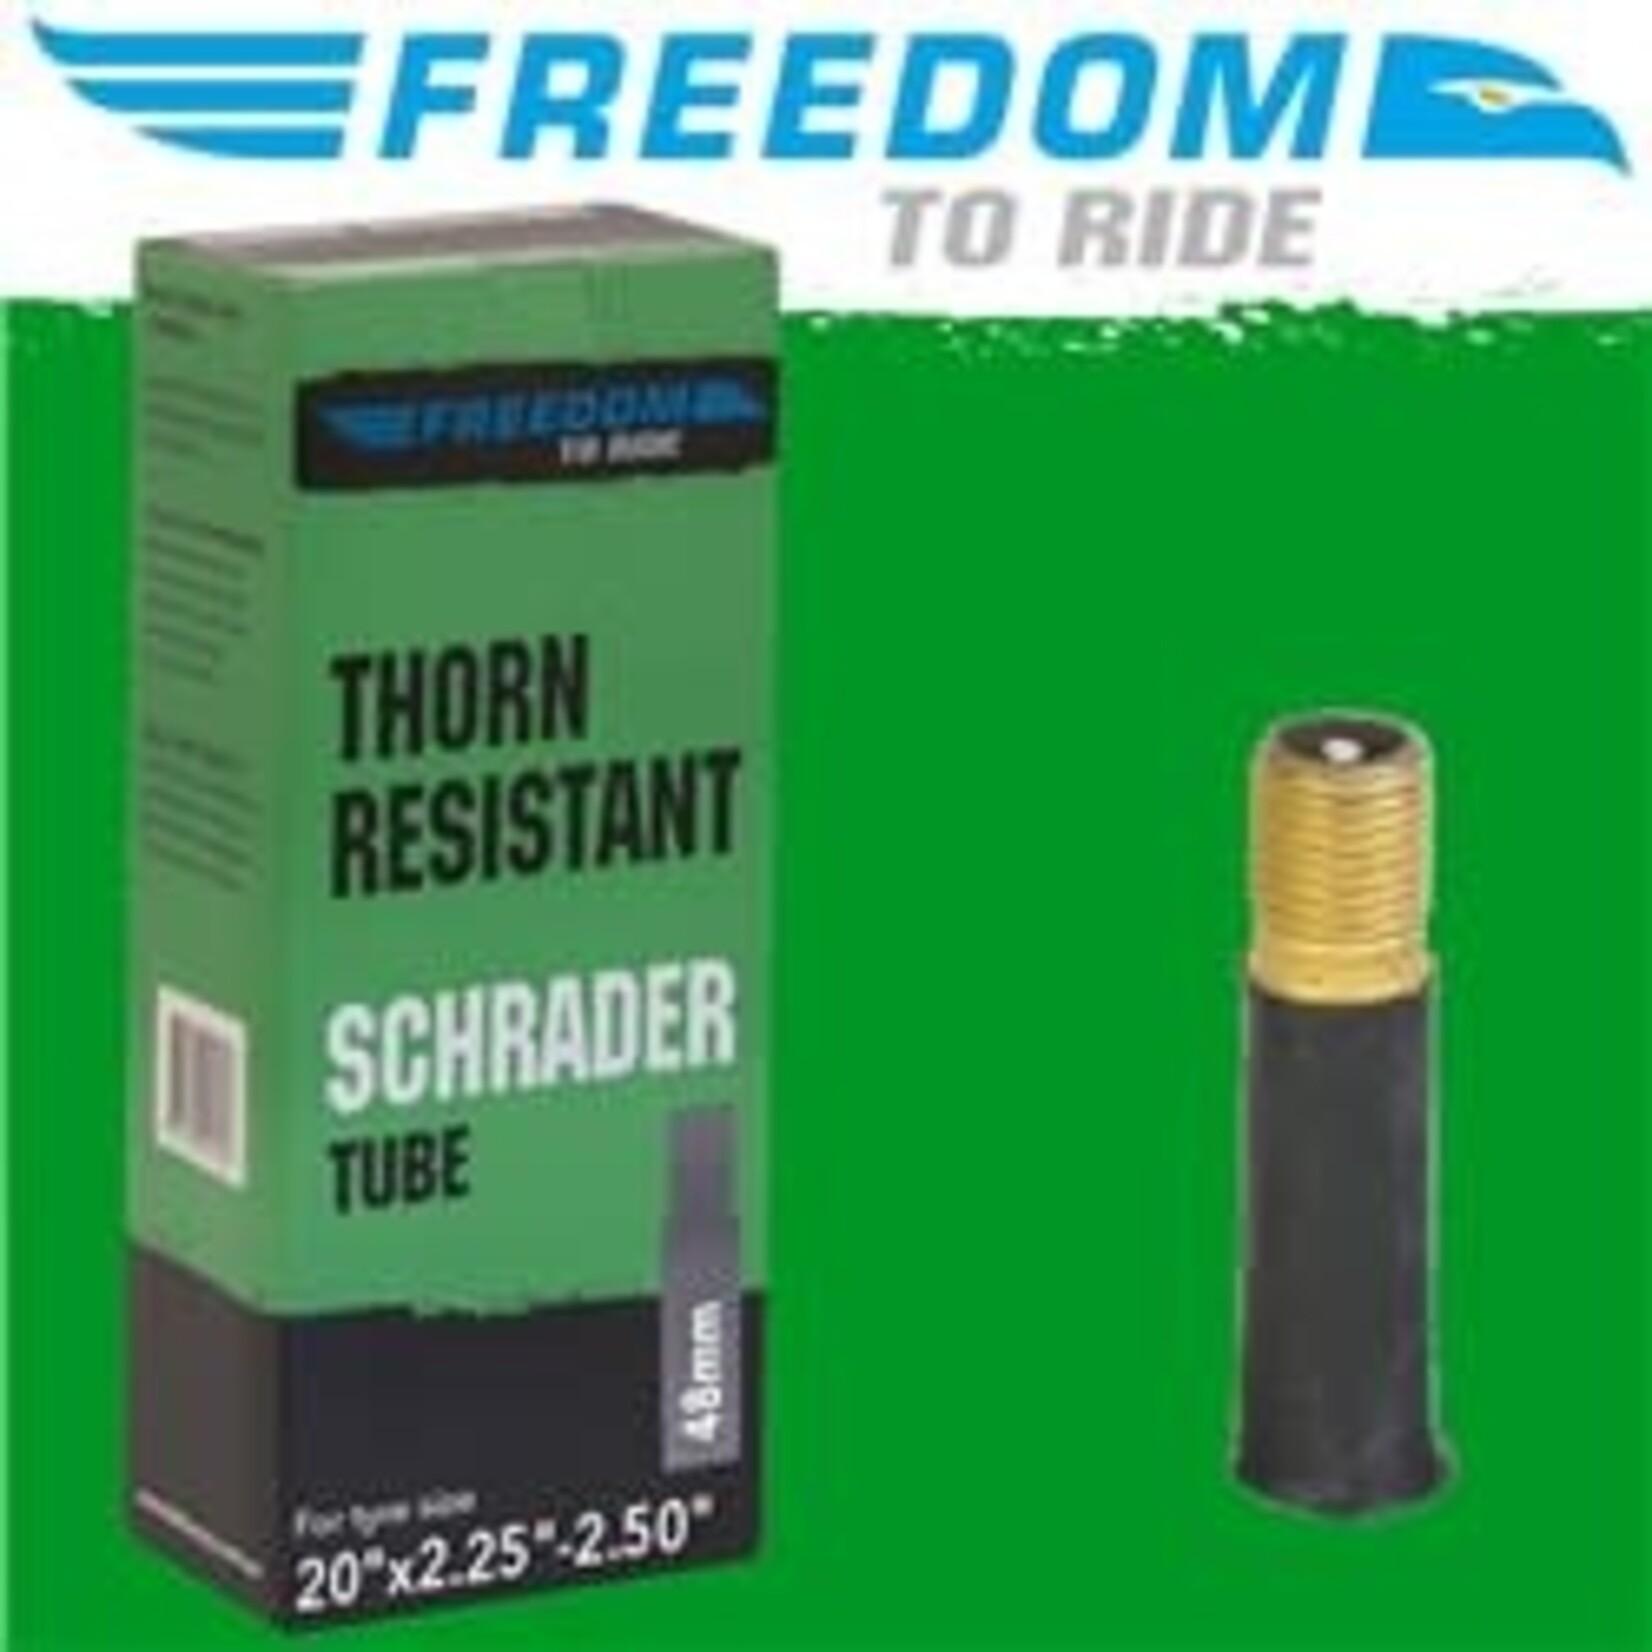 Freedom FREEDOM Thorn Resistant Tubes